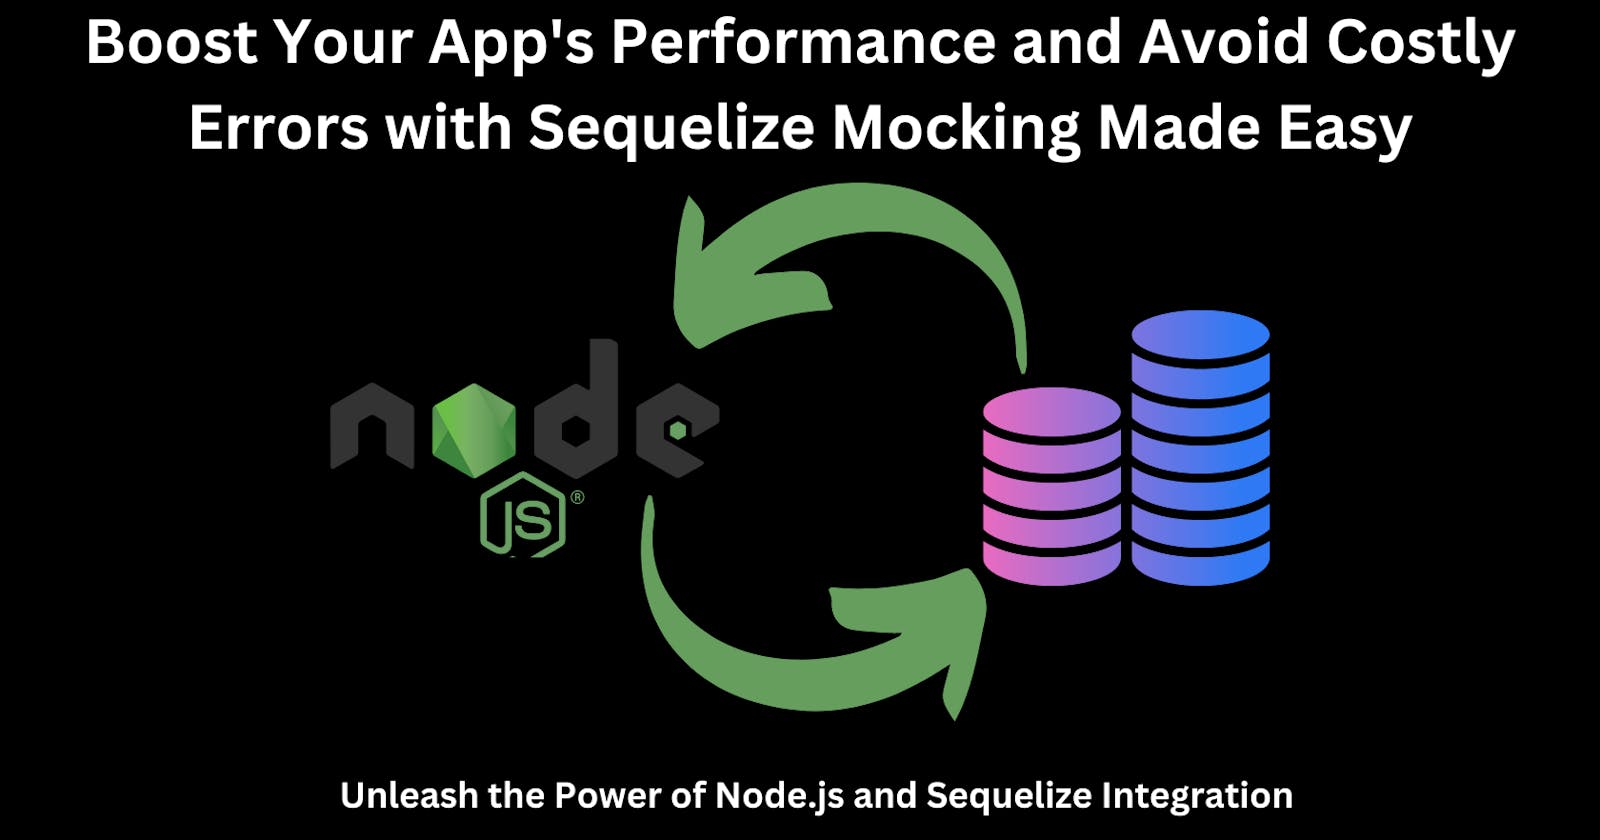 Boost Your App's Performance and Avoid Costly Errors with Sequelize Mocking Made Easy